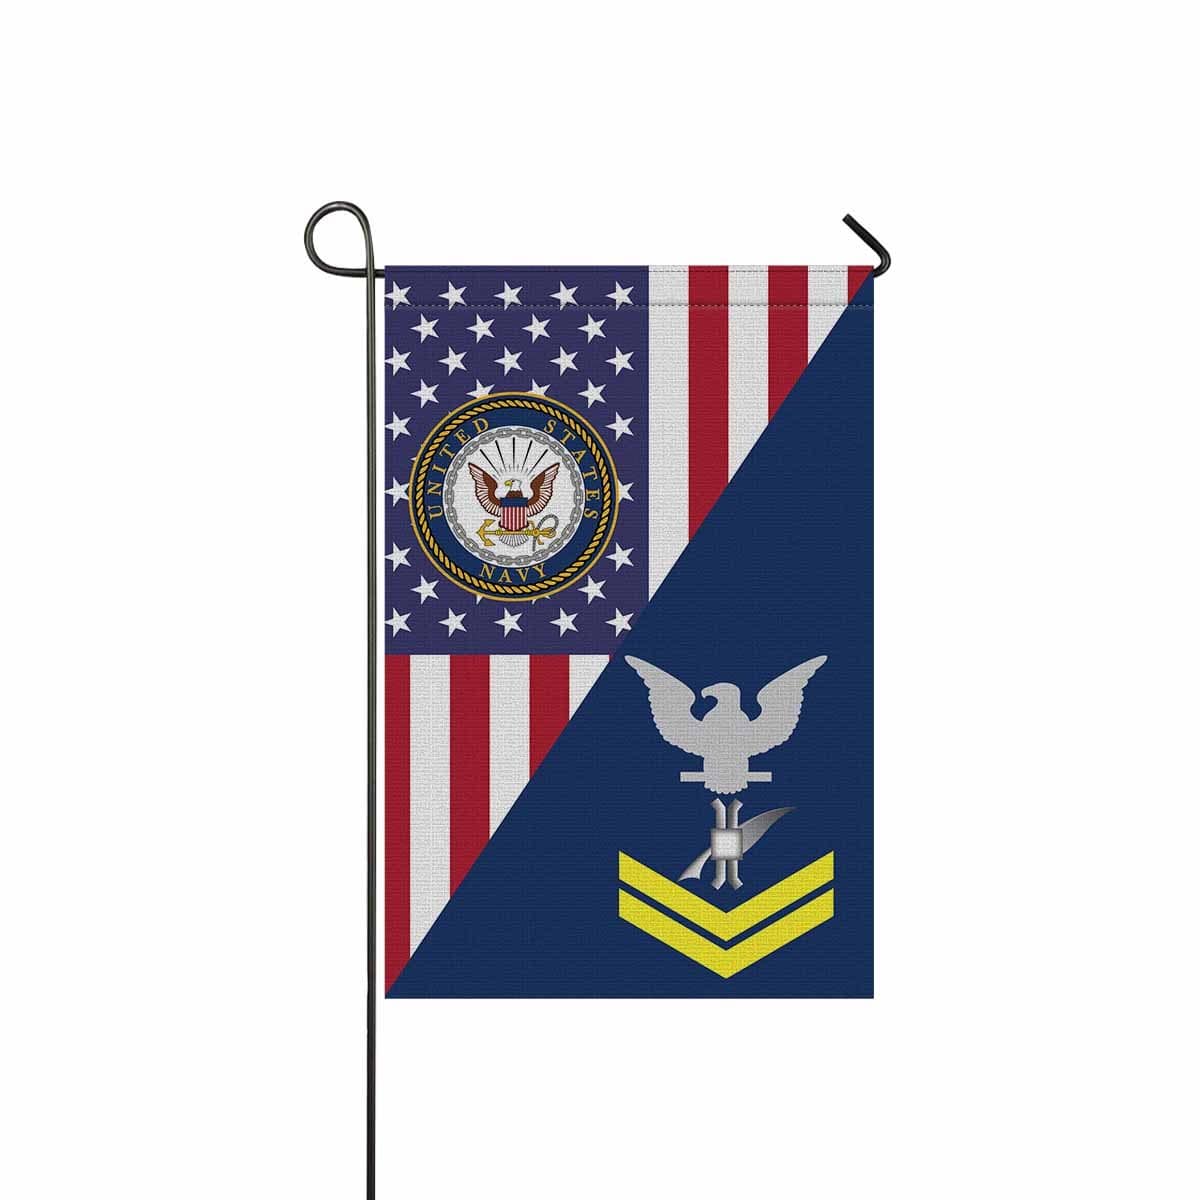 Navy Legalman Navy LN E-5 Gold Stripe Garden Flag/Yard Flag 12 inches x 18 inches Twin-Side Printing-GDFlag-Navy-Rating-Veterans Nation